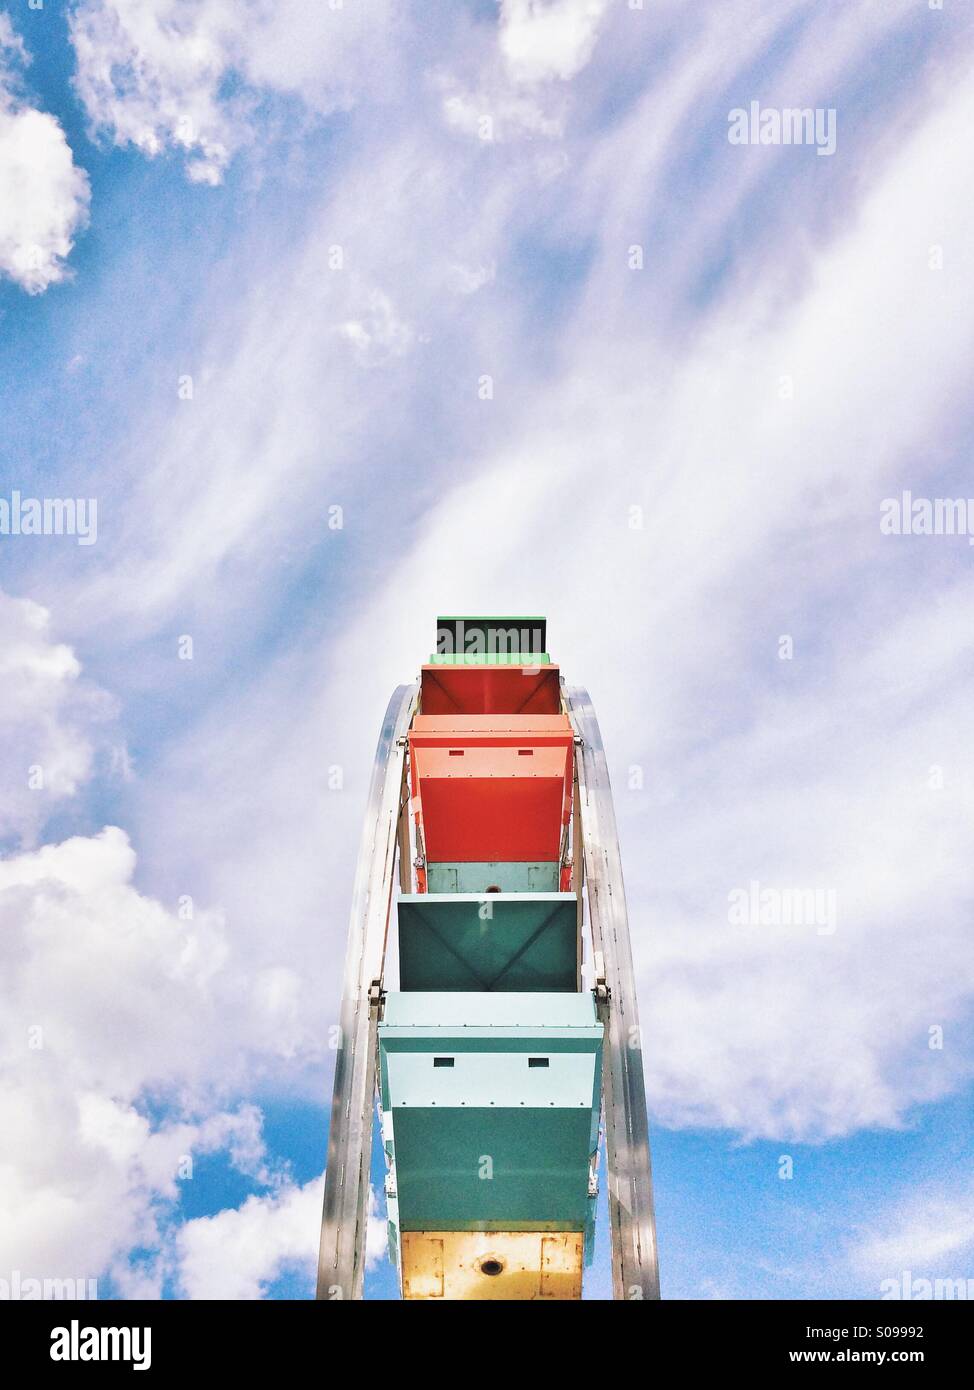 Looking up at a colourful Ferris wheel in the open blue sky with clouds. Stock Photo